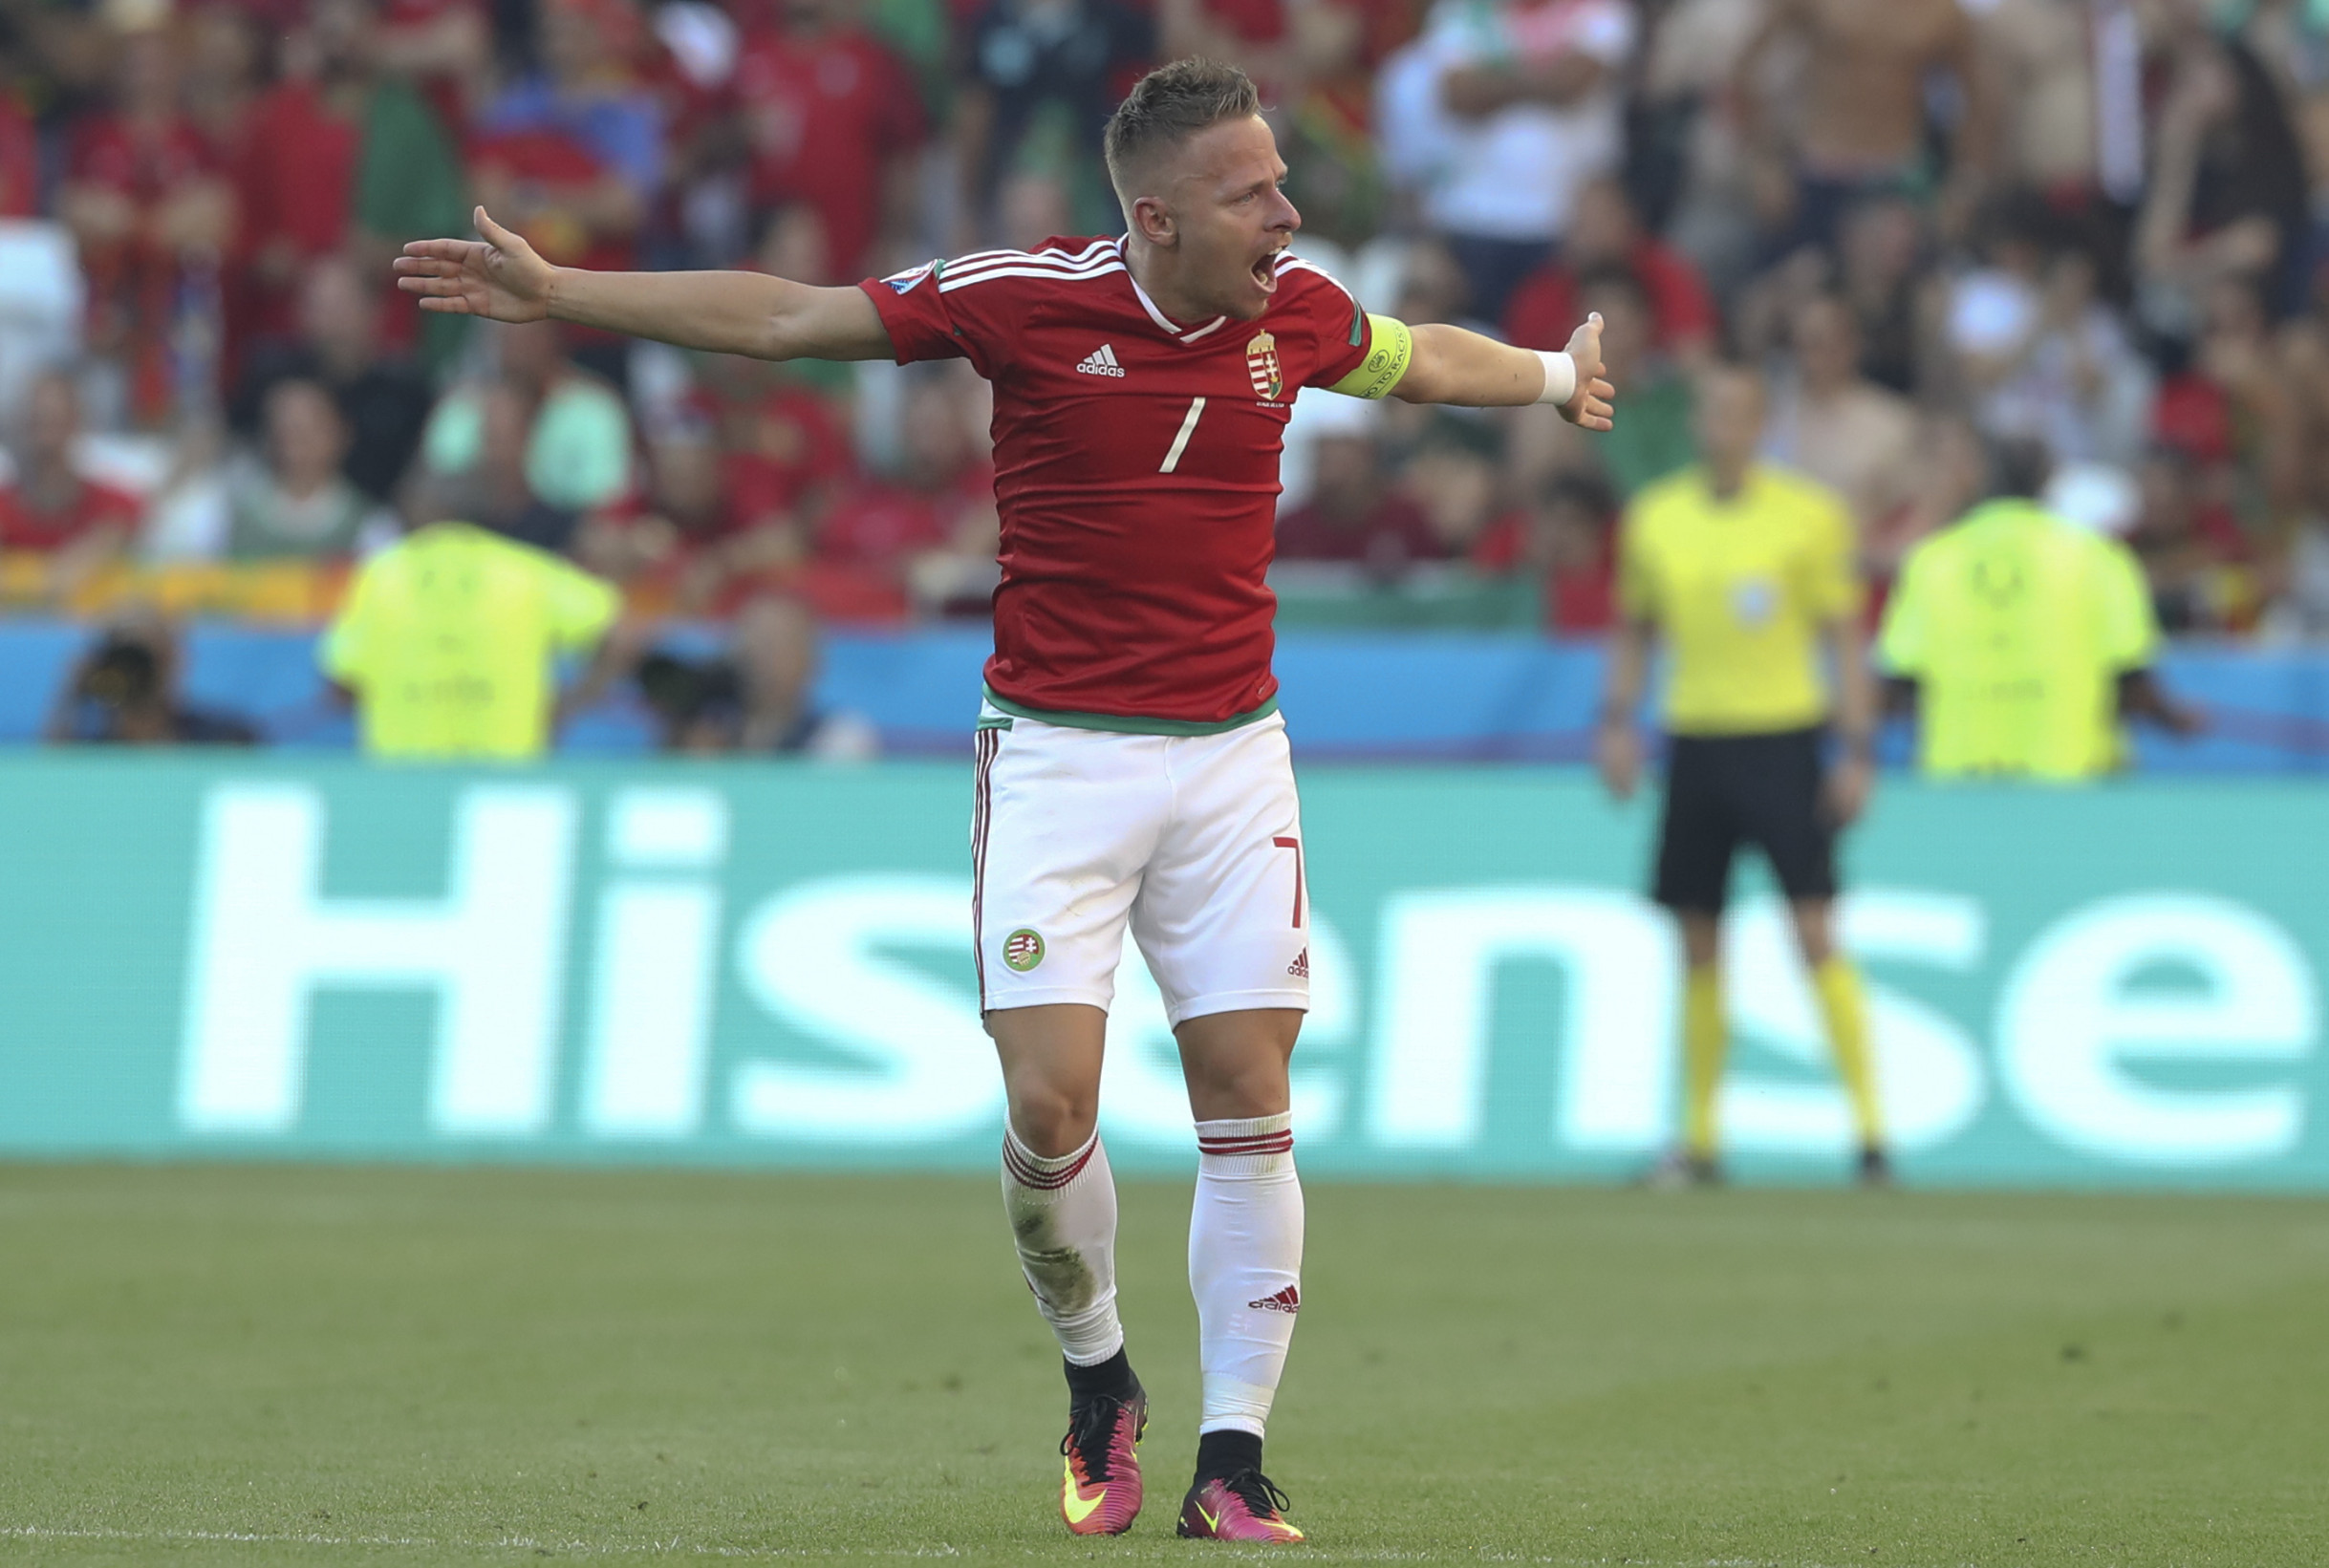 Maďarská Balazs Dzsudzsak celebrates after scoring his side's second goal during the Euro 2016 Group F soccer match between Hungary and Portugal at the Grand Stade in Decines-­Charpieu, near Lyon, France, Wednesday, June 22, 2016. (AP Photo/Laurent Cipriani)